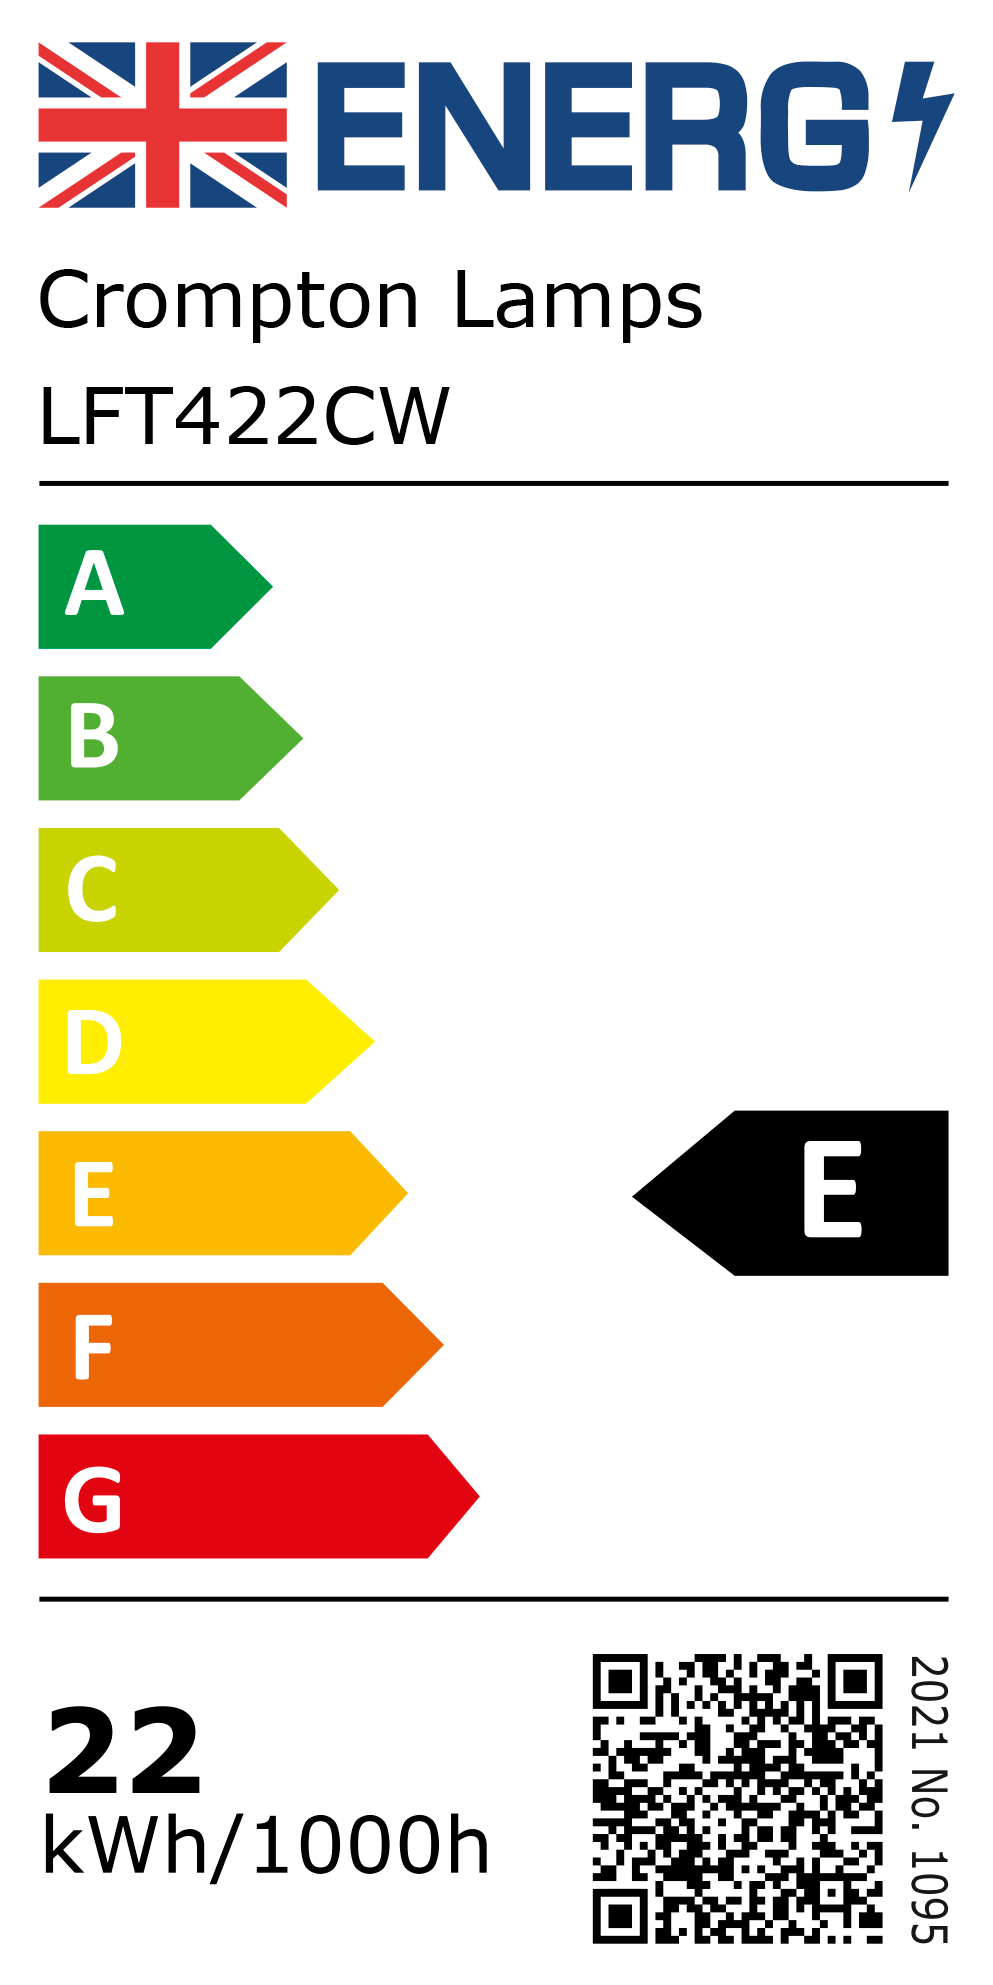 New 2021 Energy Rating Label: Stock Code LFT422CW